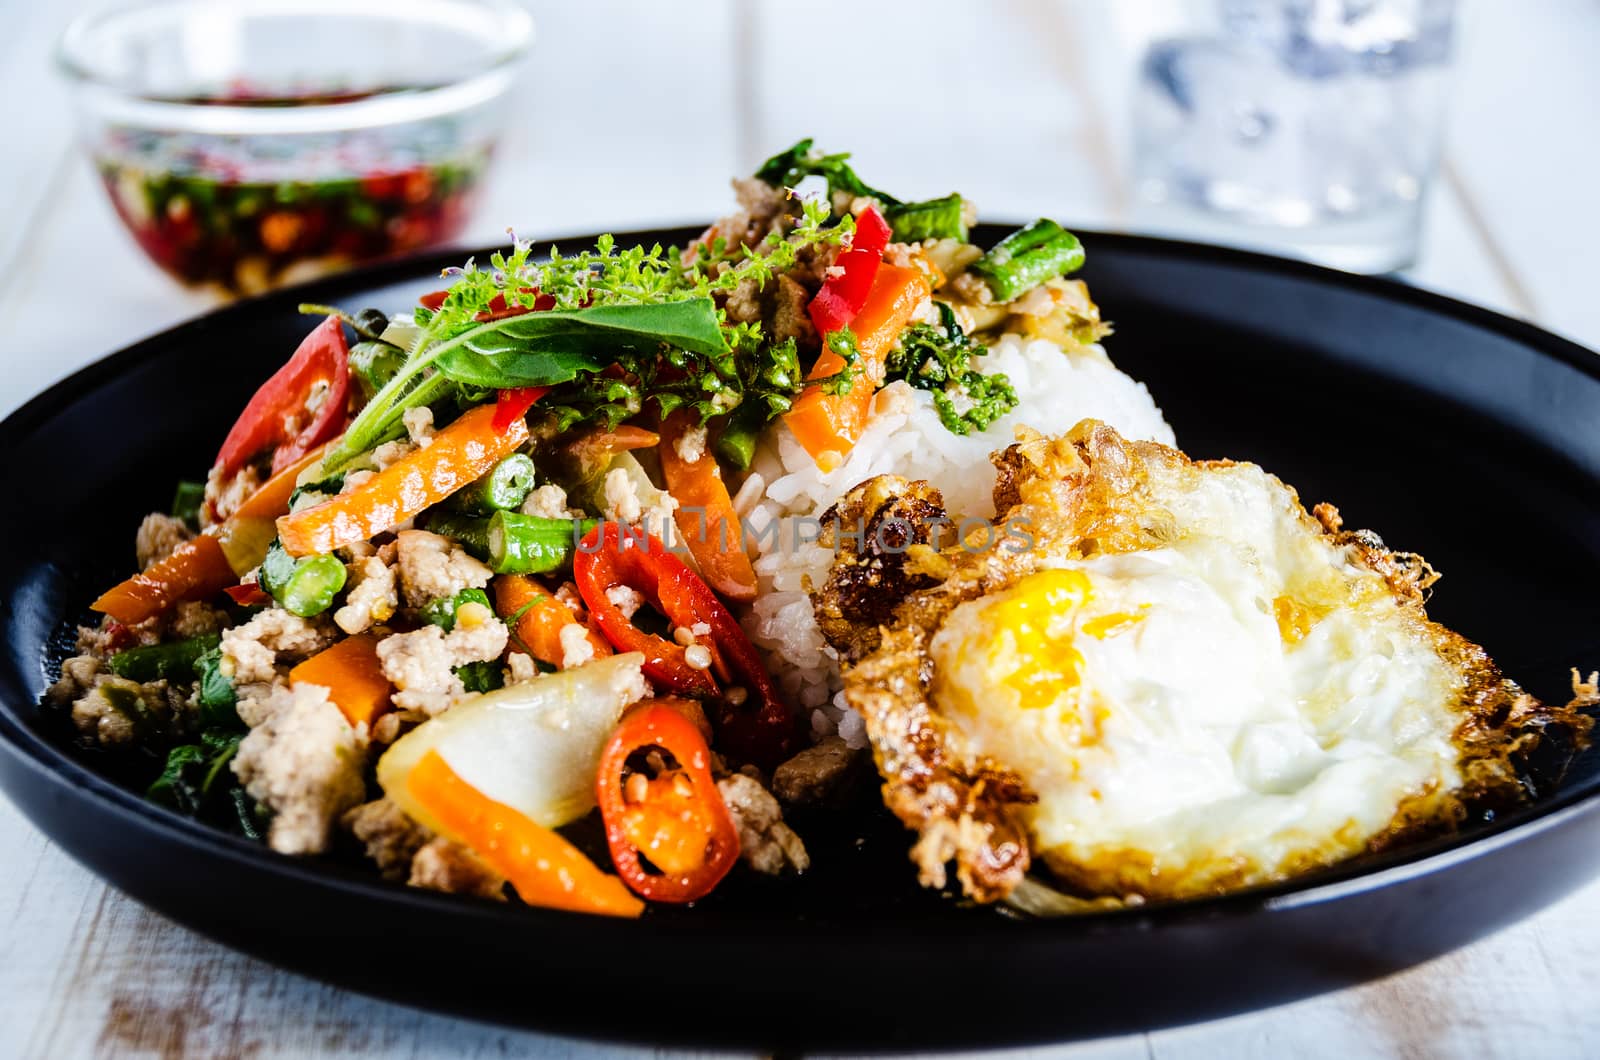 Thai spicy food basil pork fried with rice and fried egg and chili fish sauce,Pad Kra Pao moo